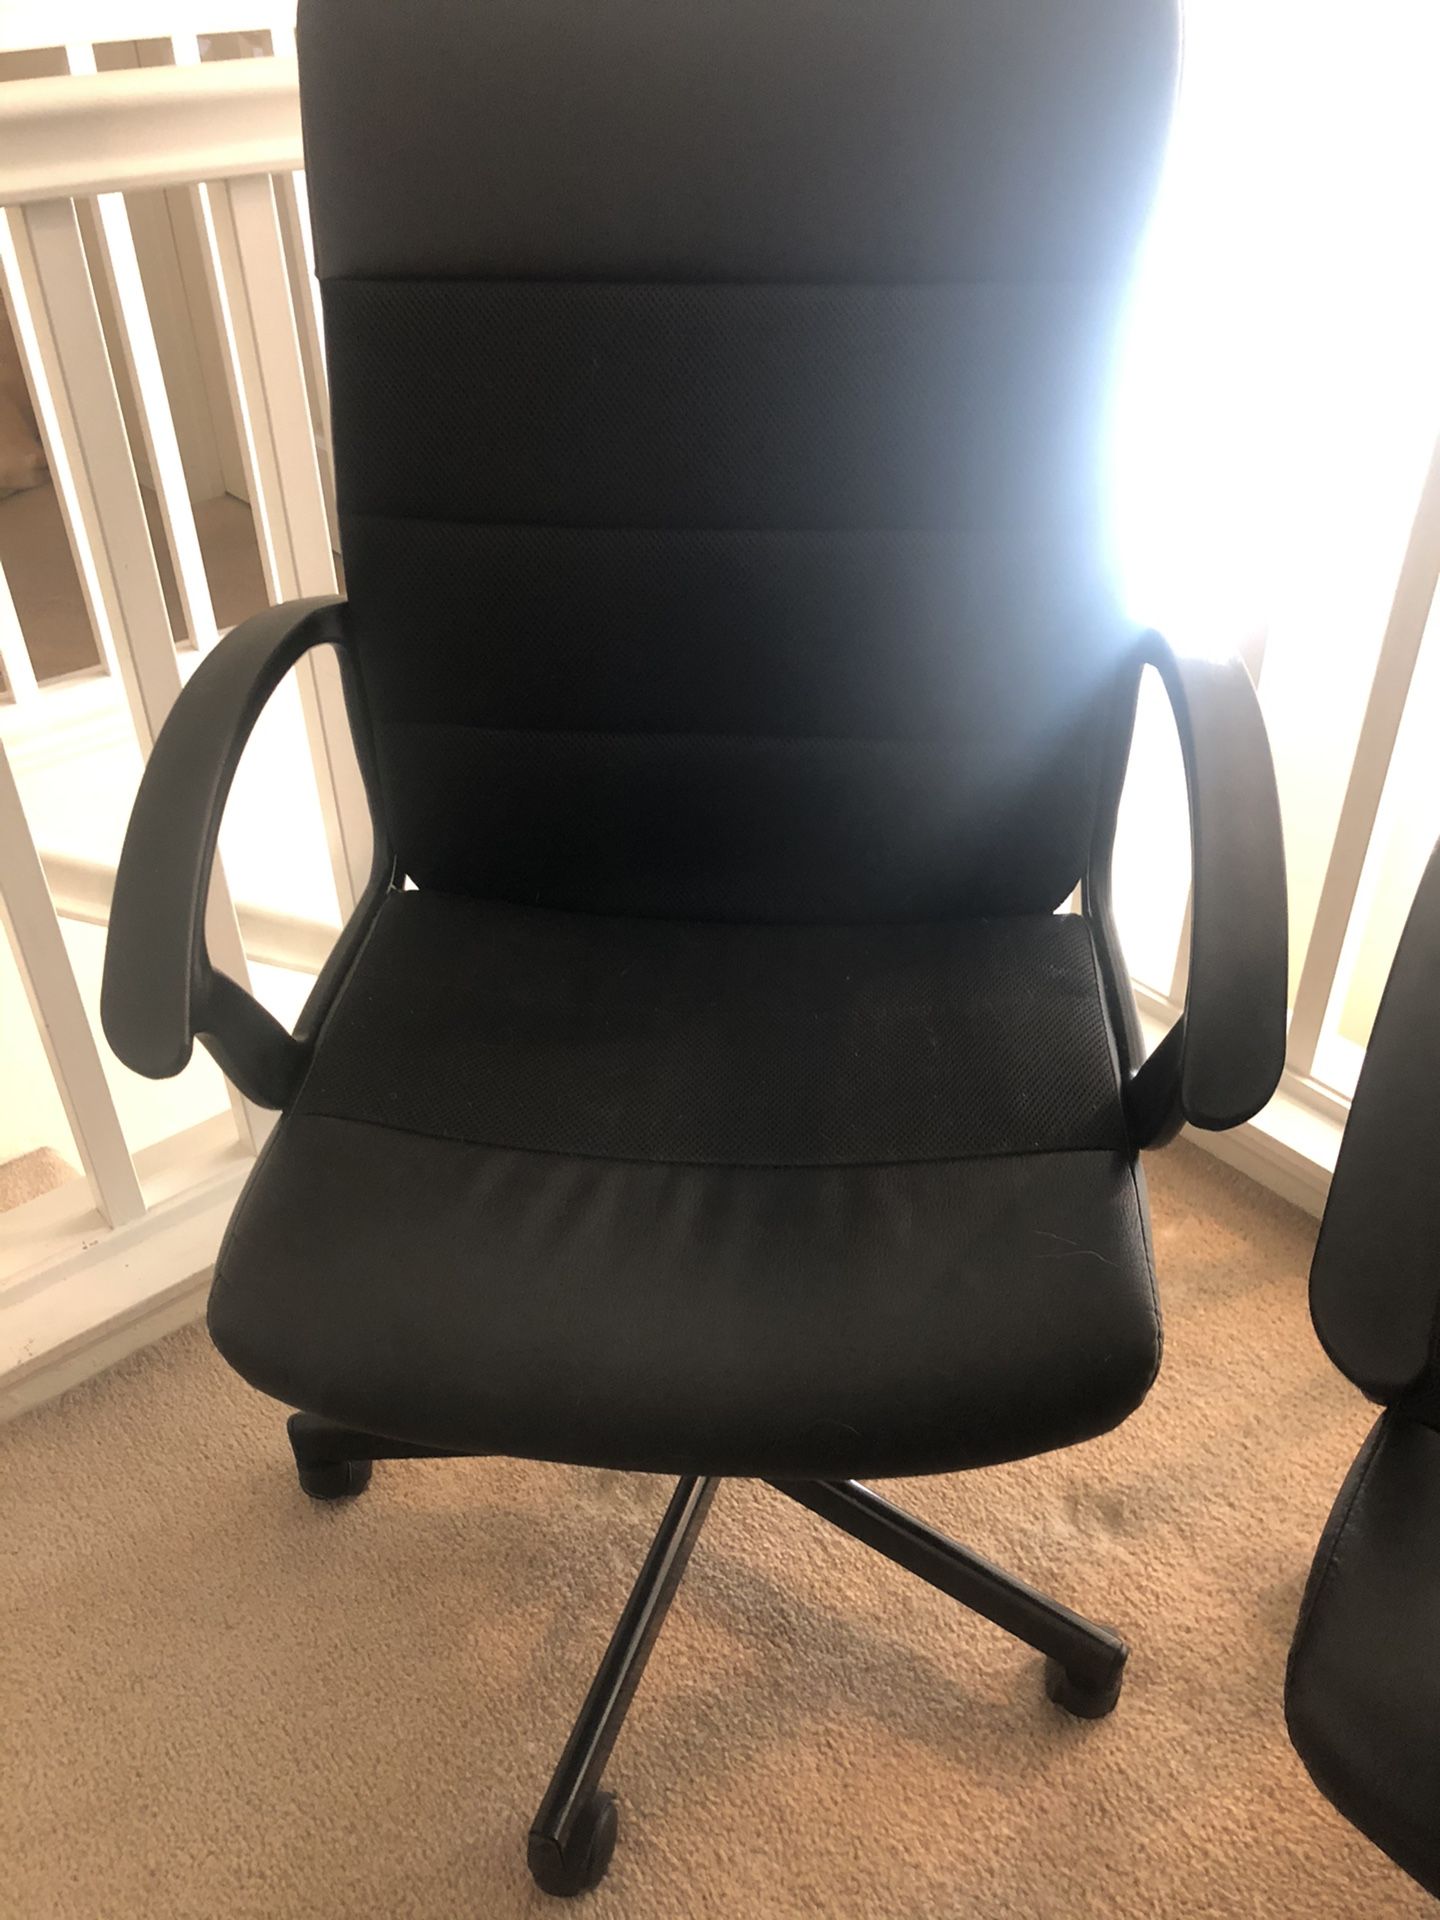 Two Office Chairs - Barely Used